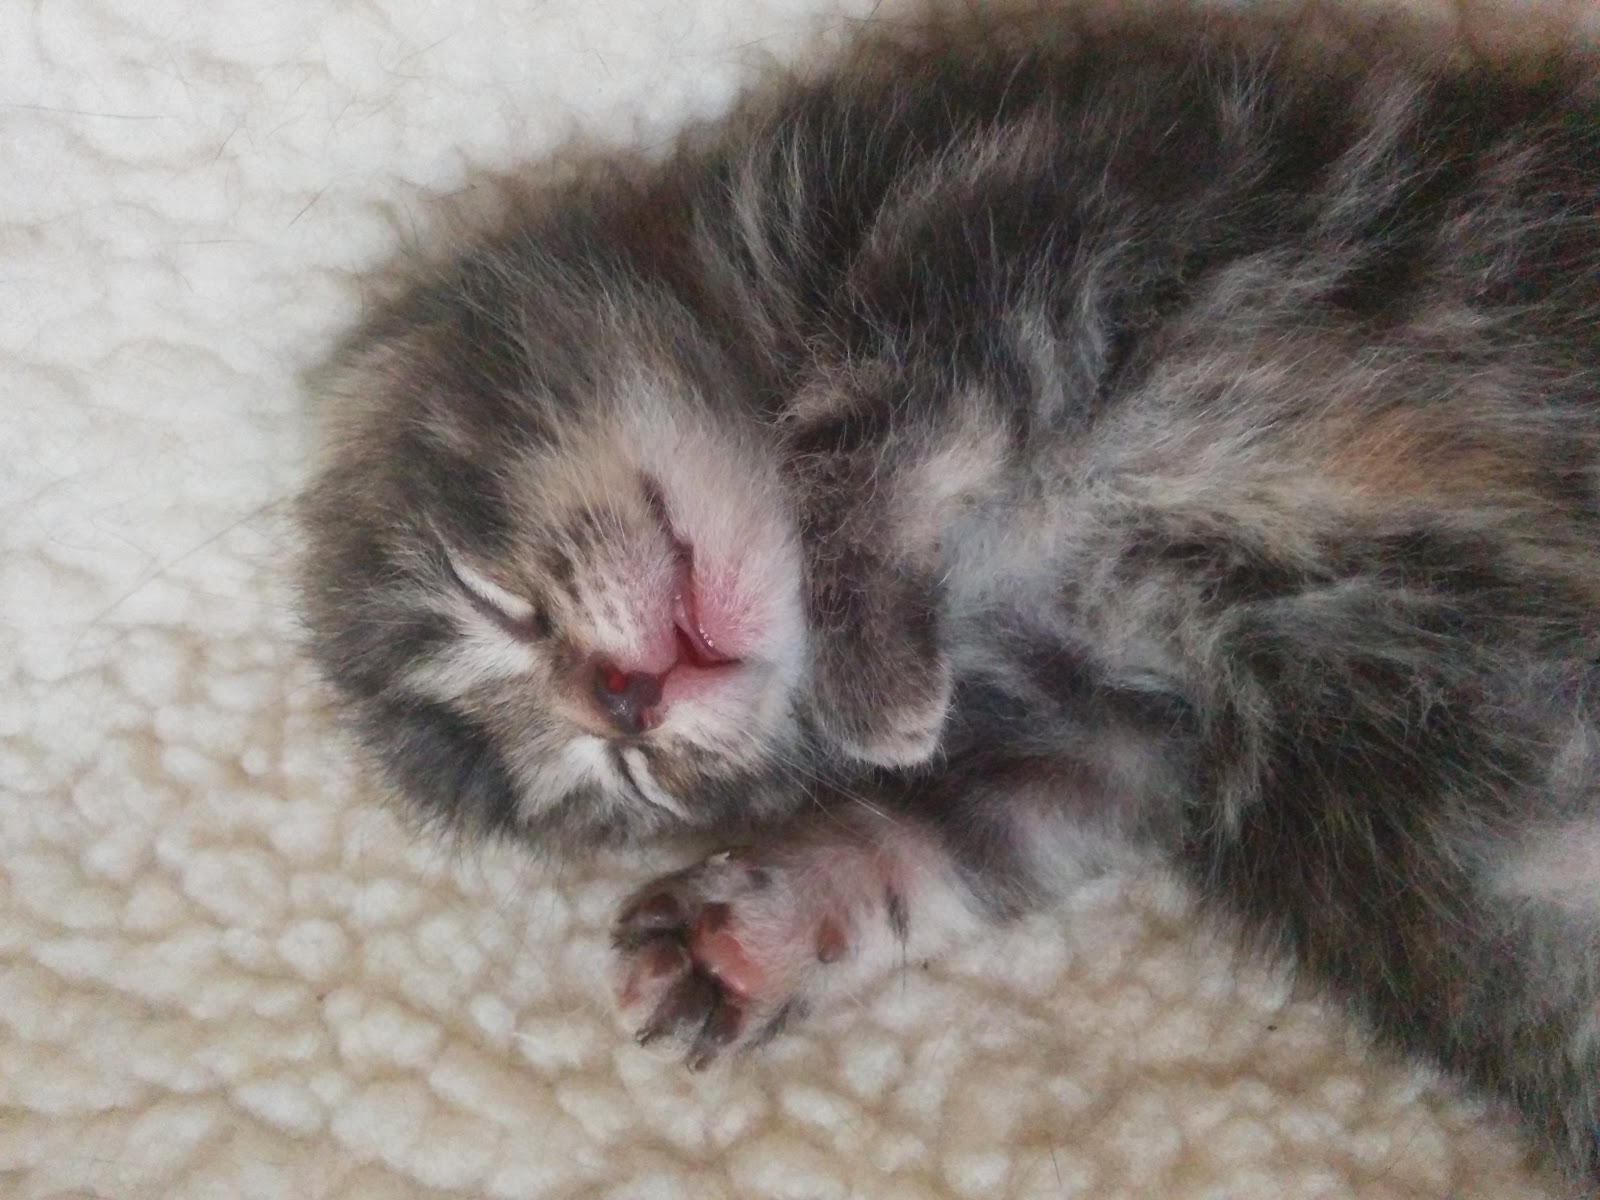 A Mothers Ramblings: 11 Day Old Kittens - Wordless Wednesday